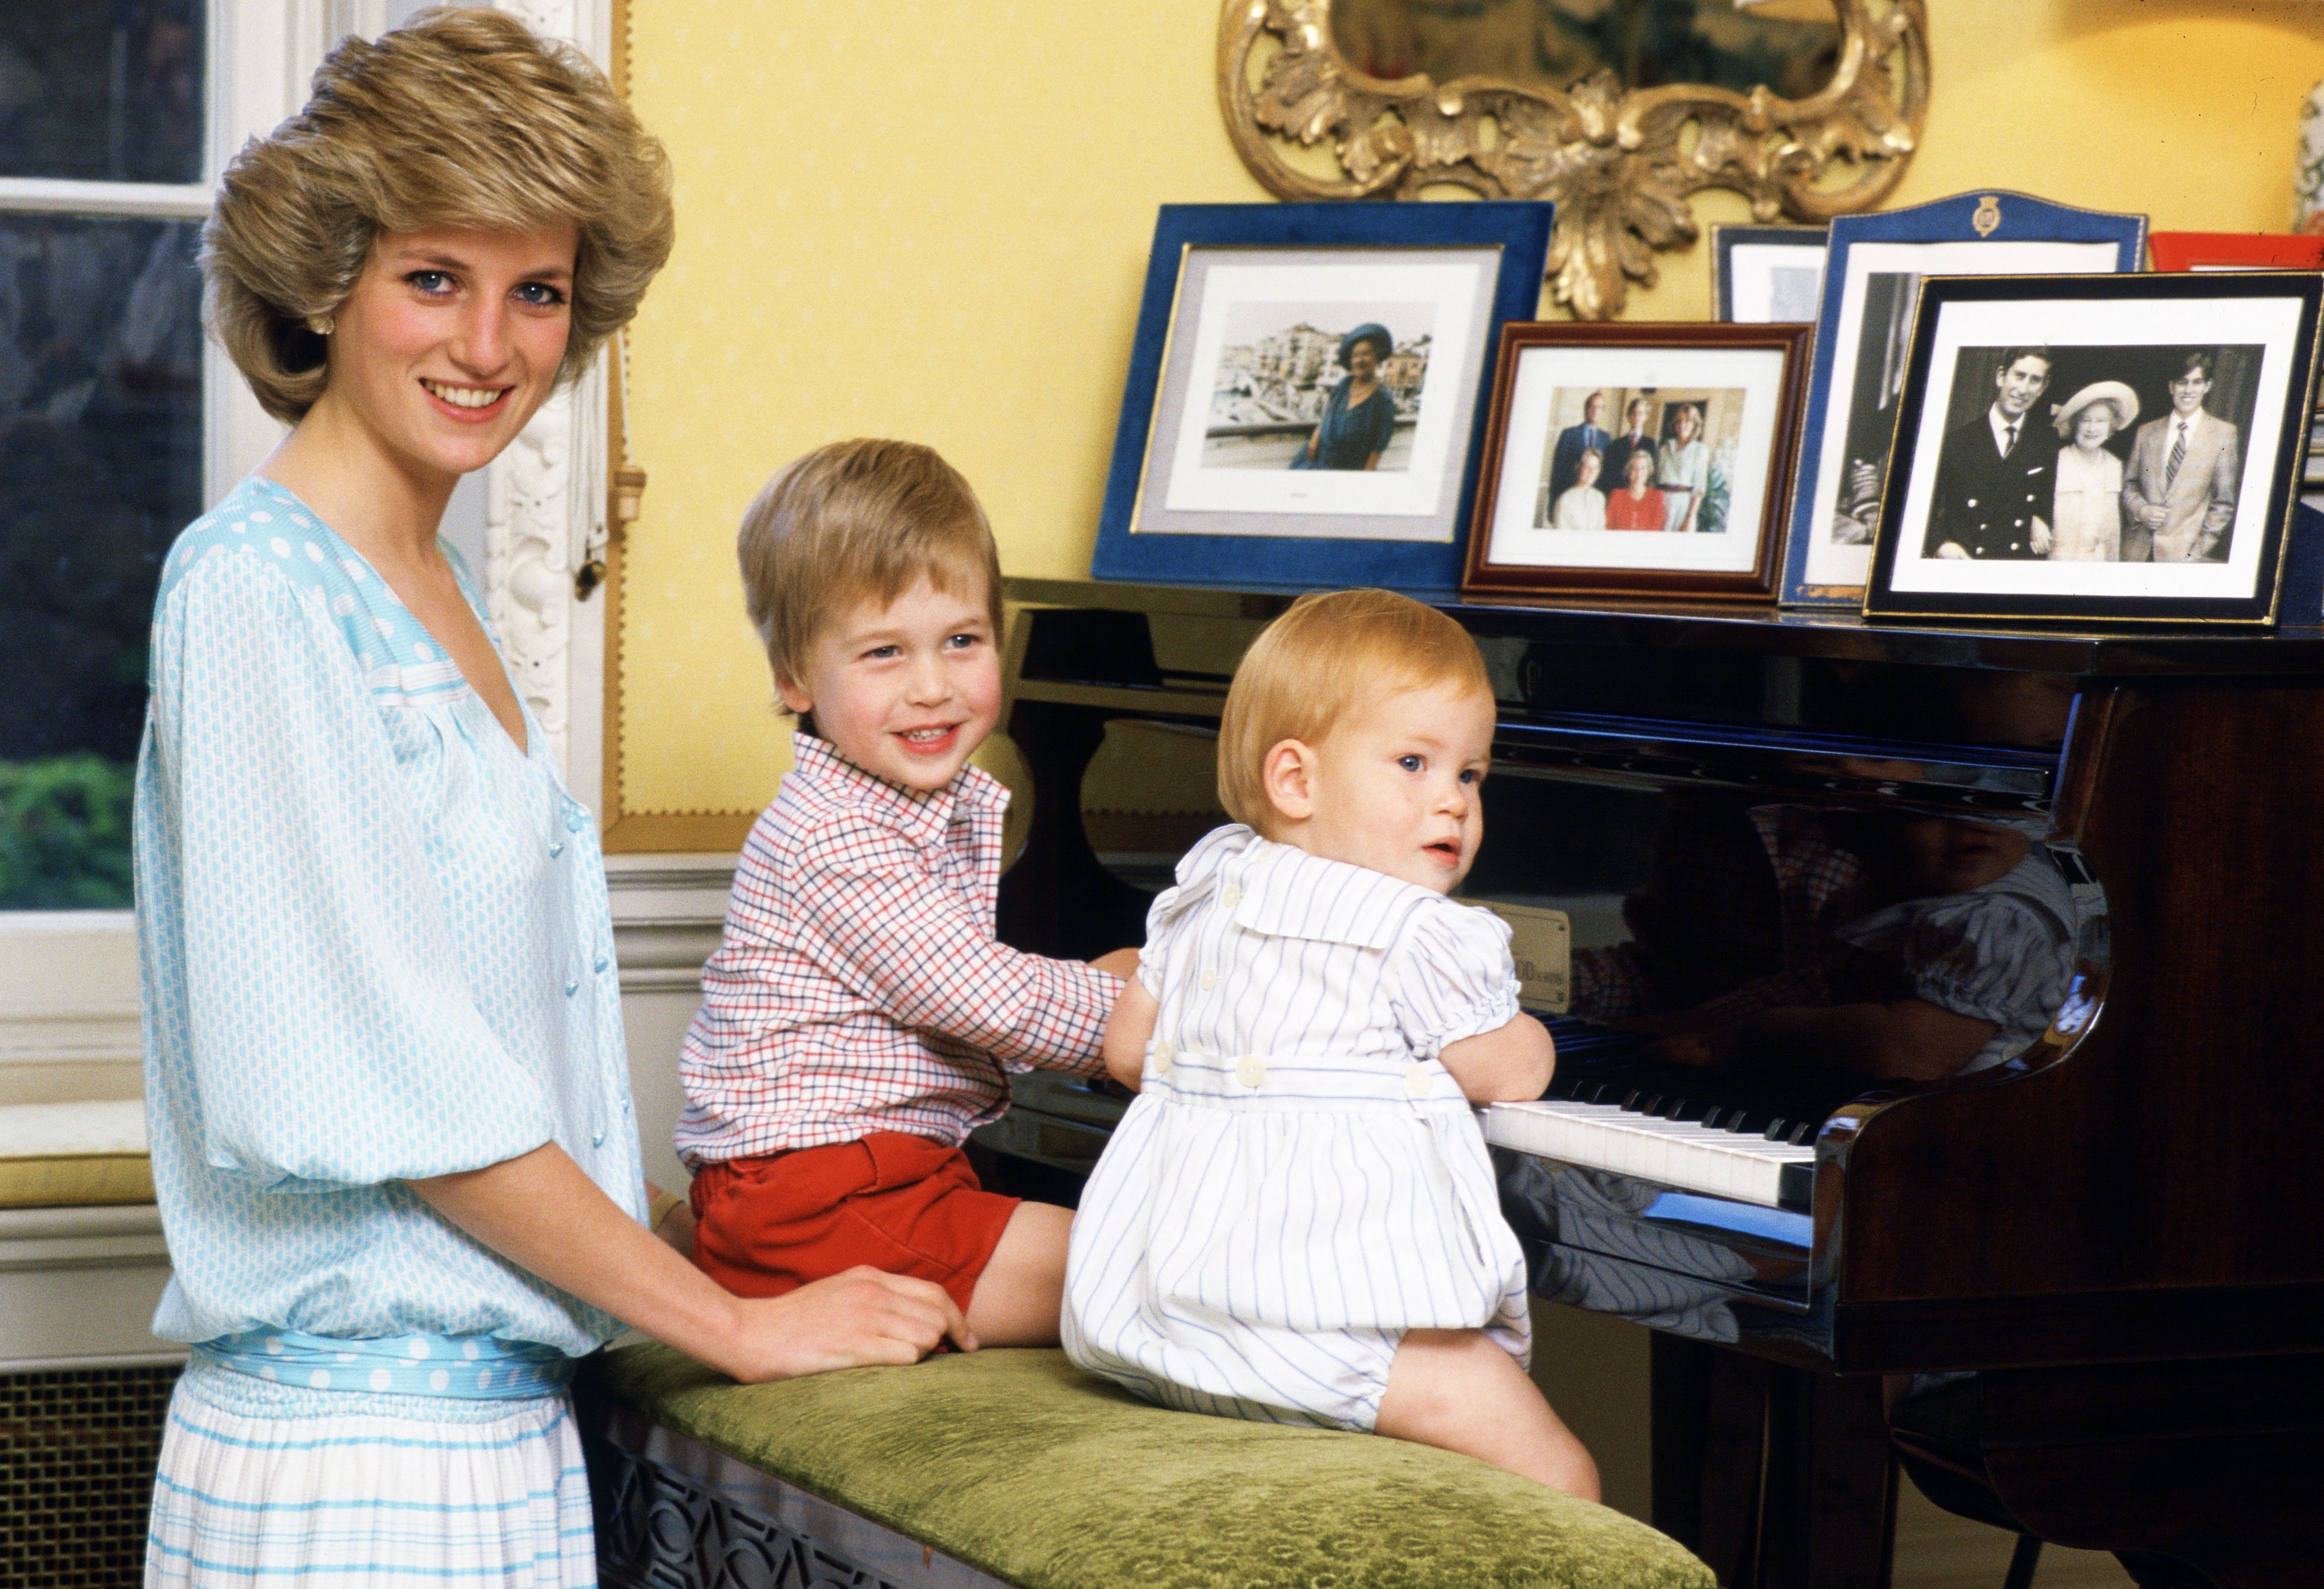 Princess Diana with William and Harry in London 1985. | Source: Getty Images